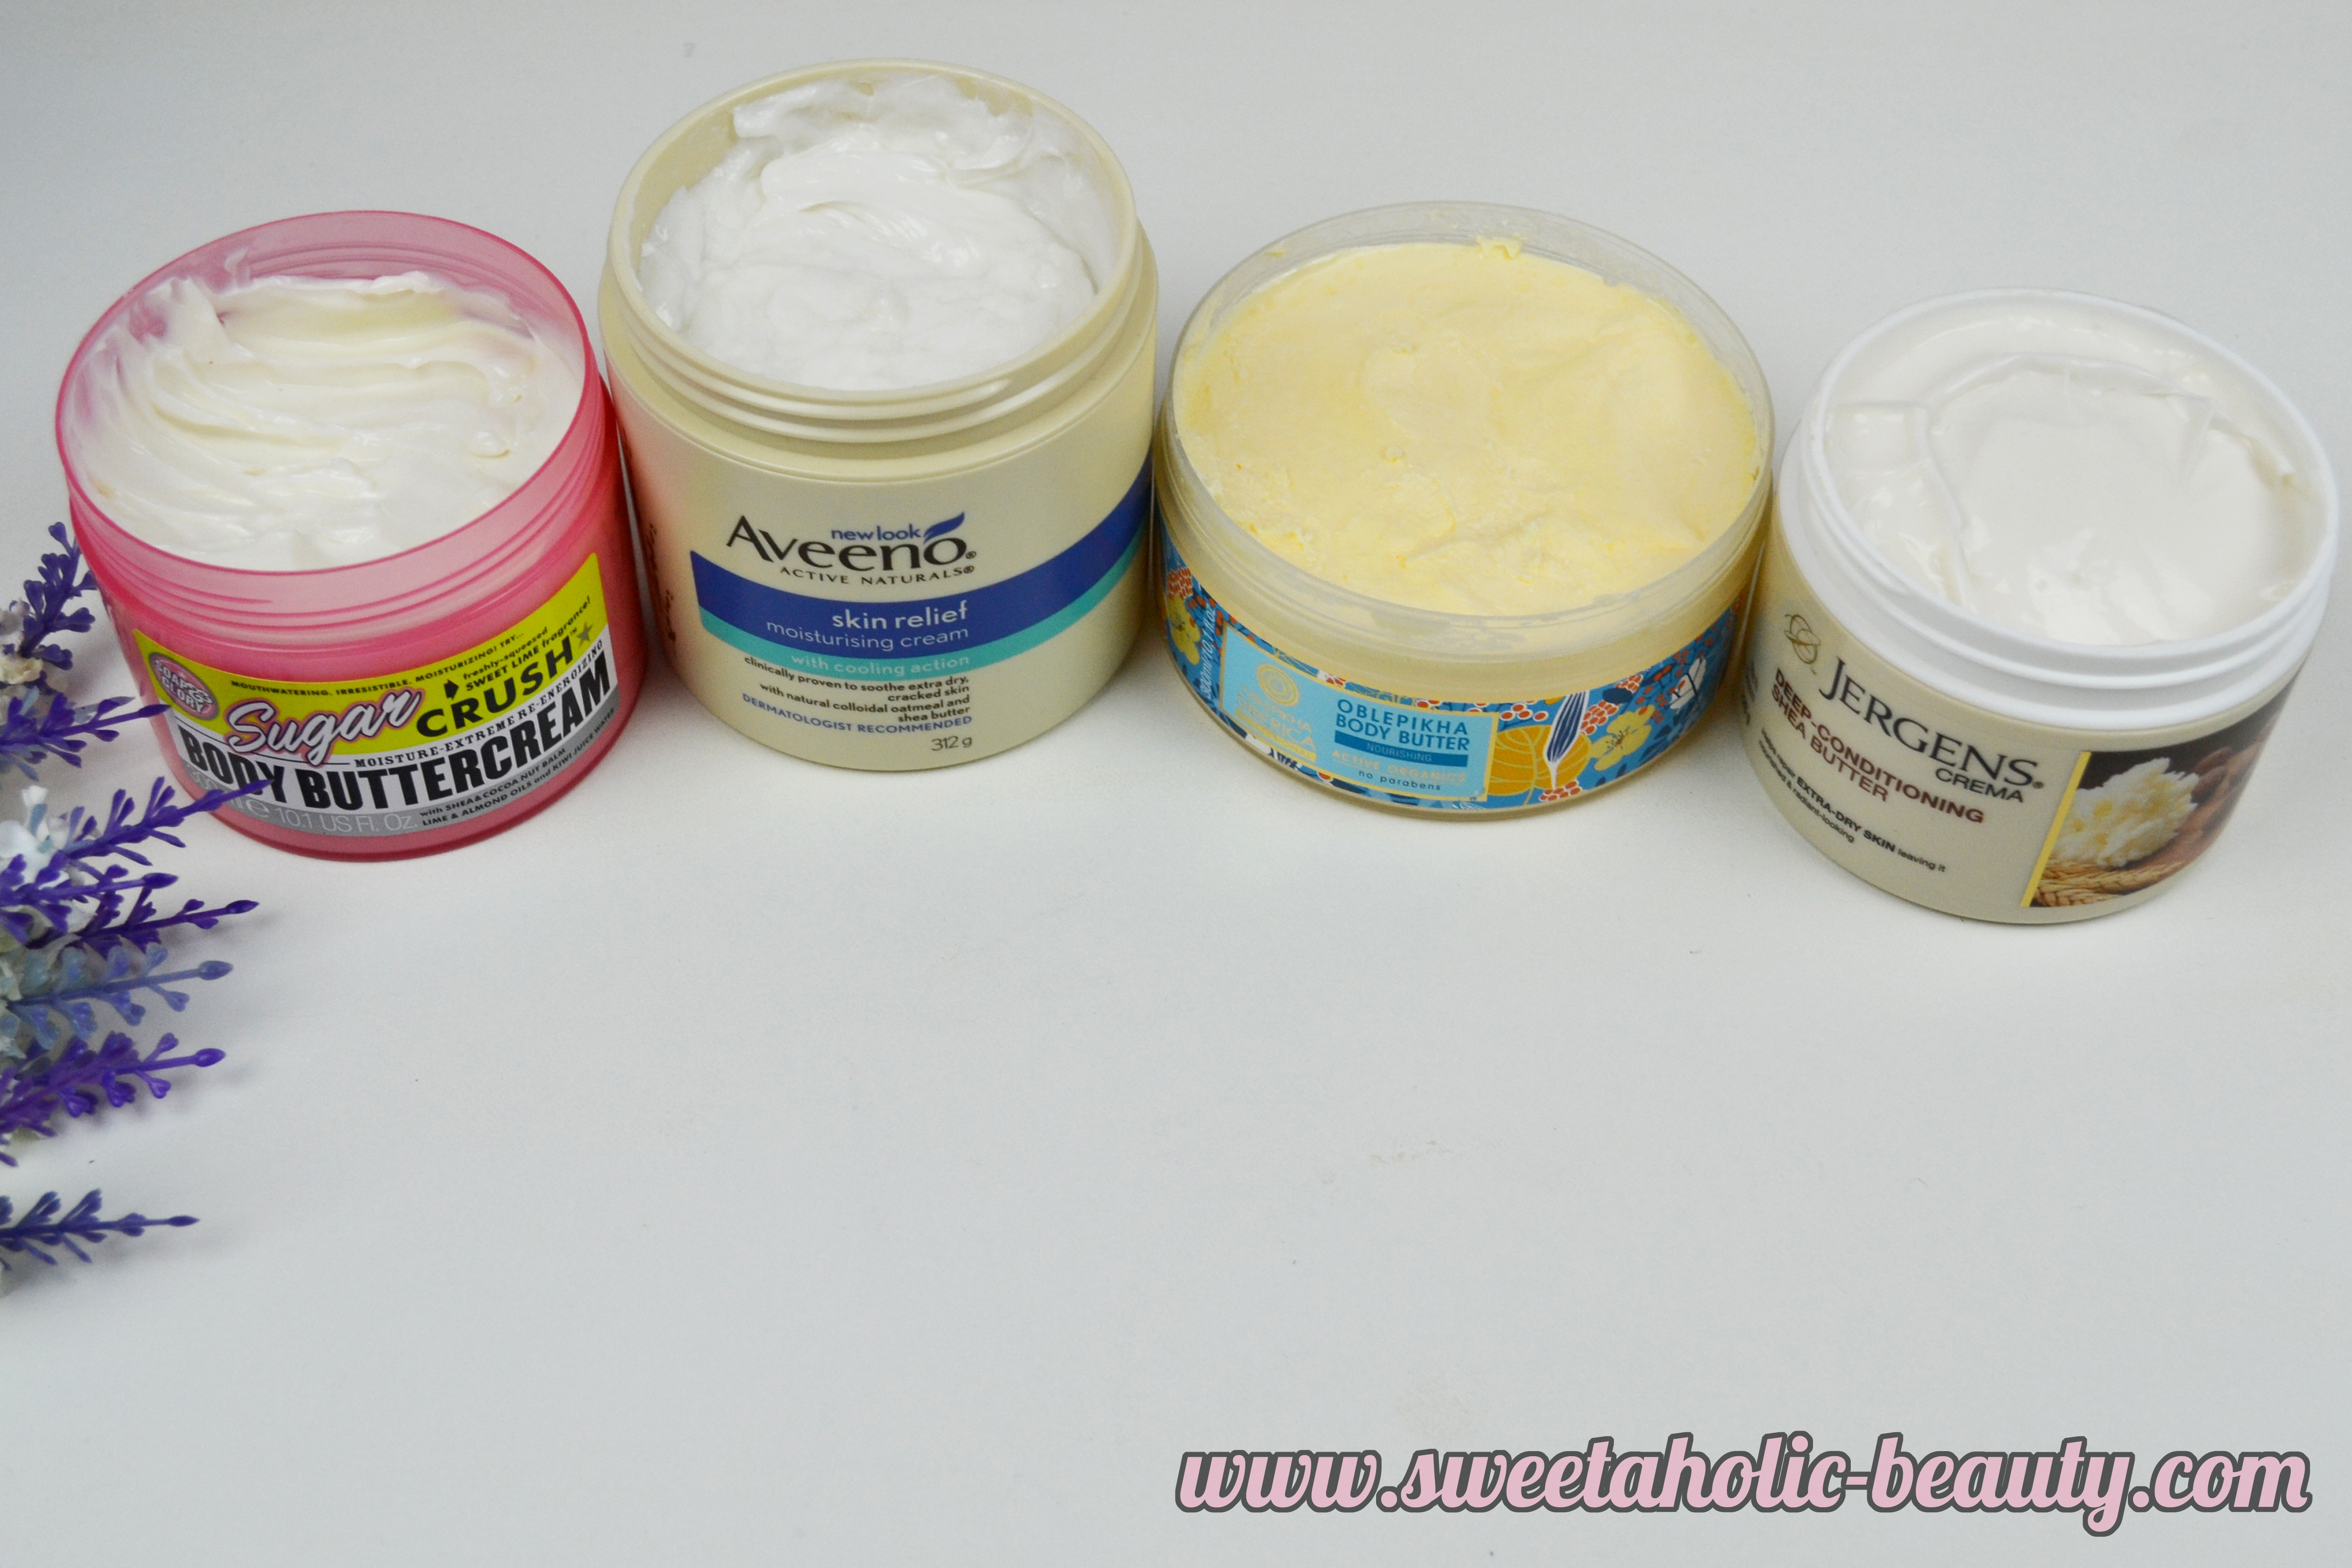 The Best Body Butters for Winter - Sweetaholic Beauty